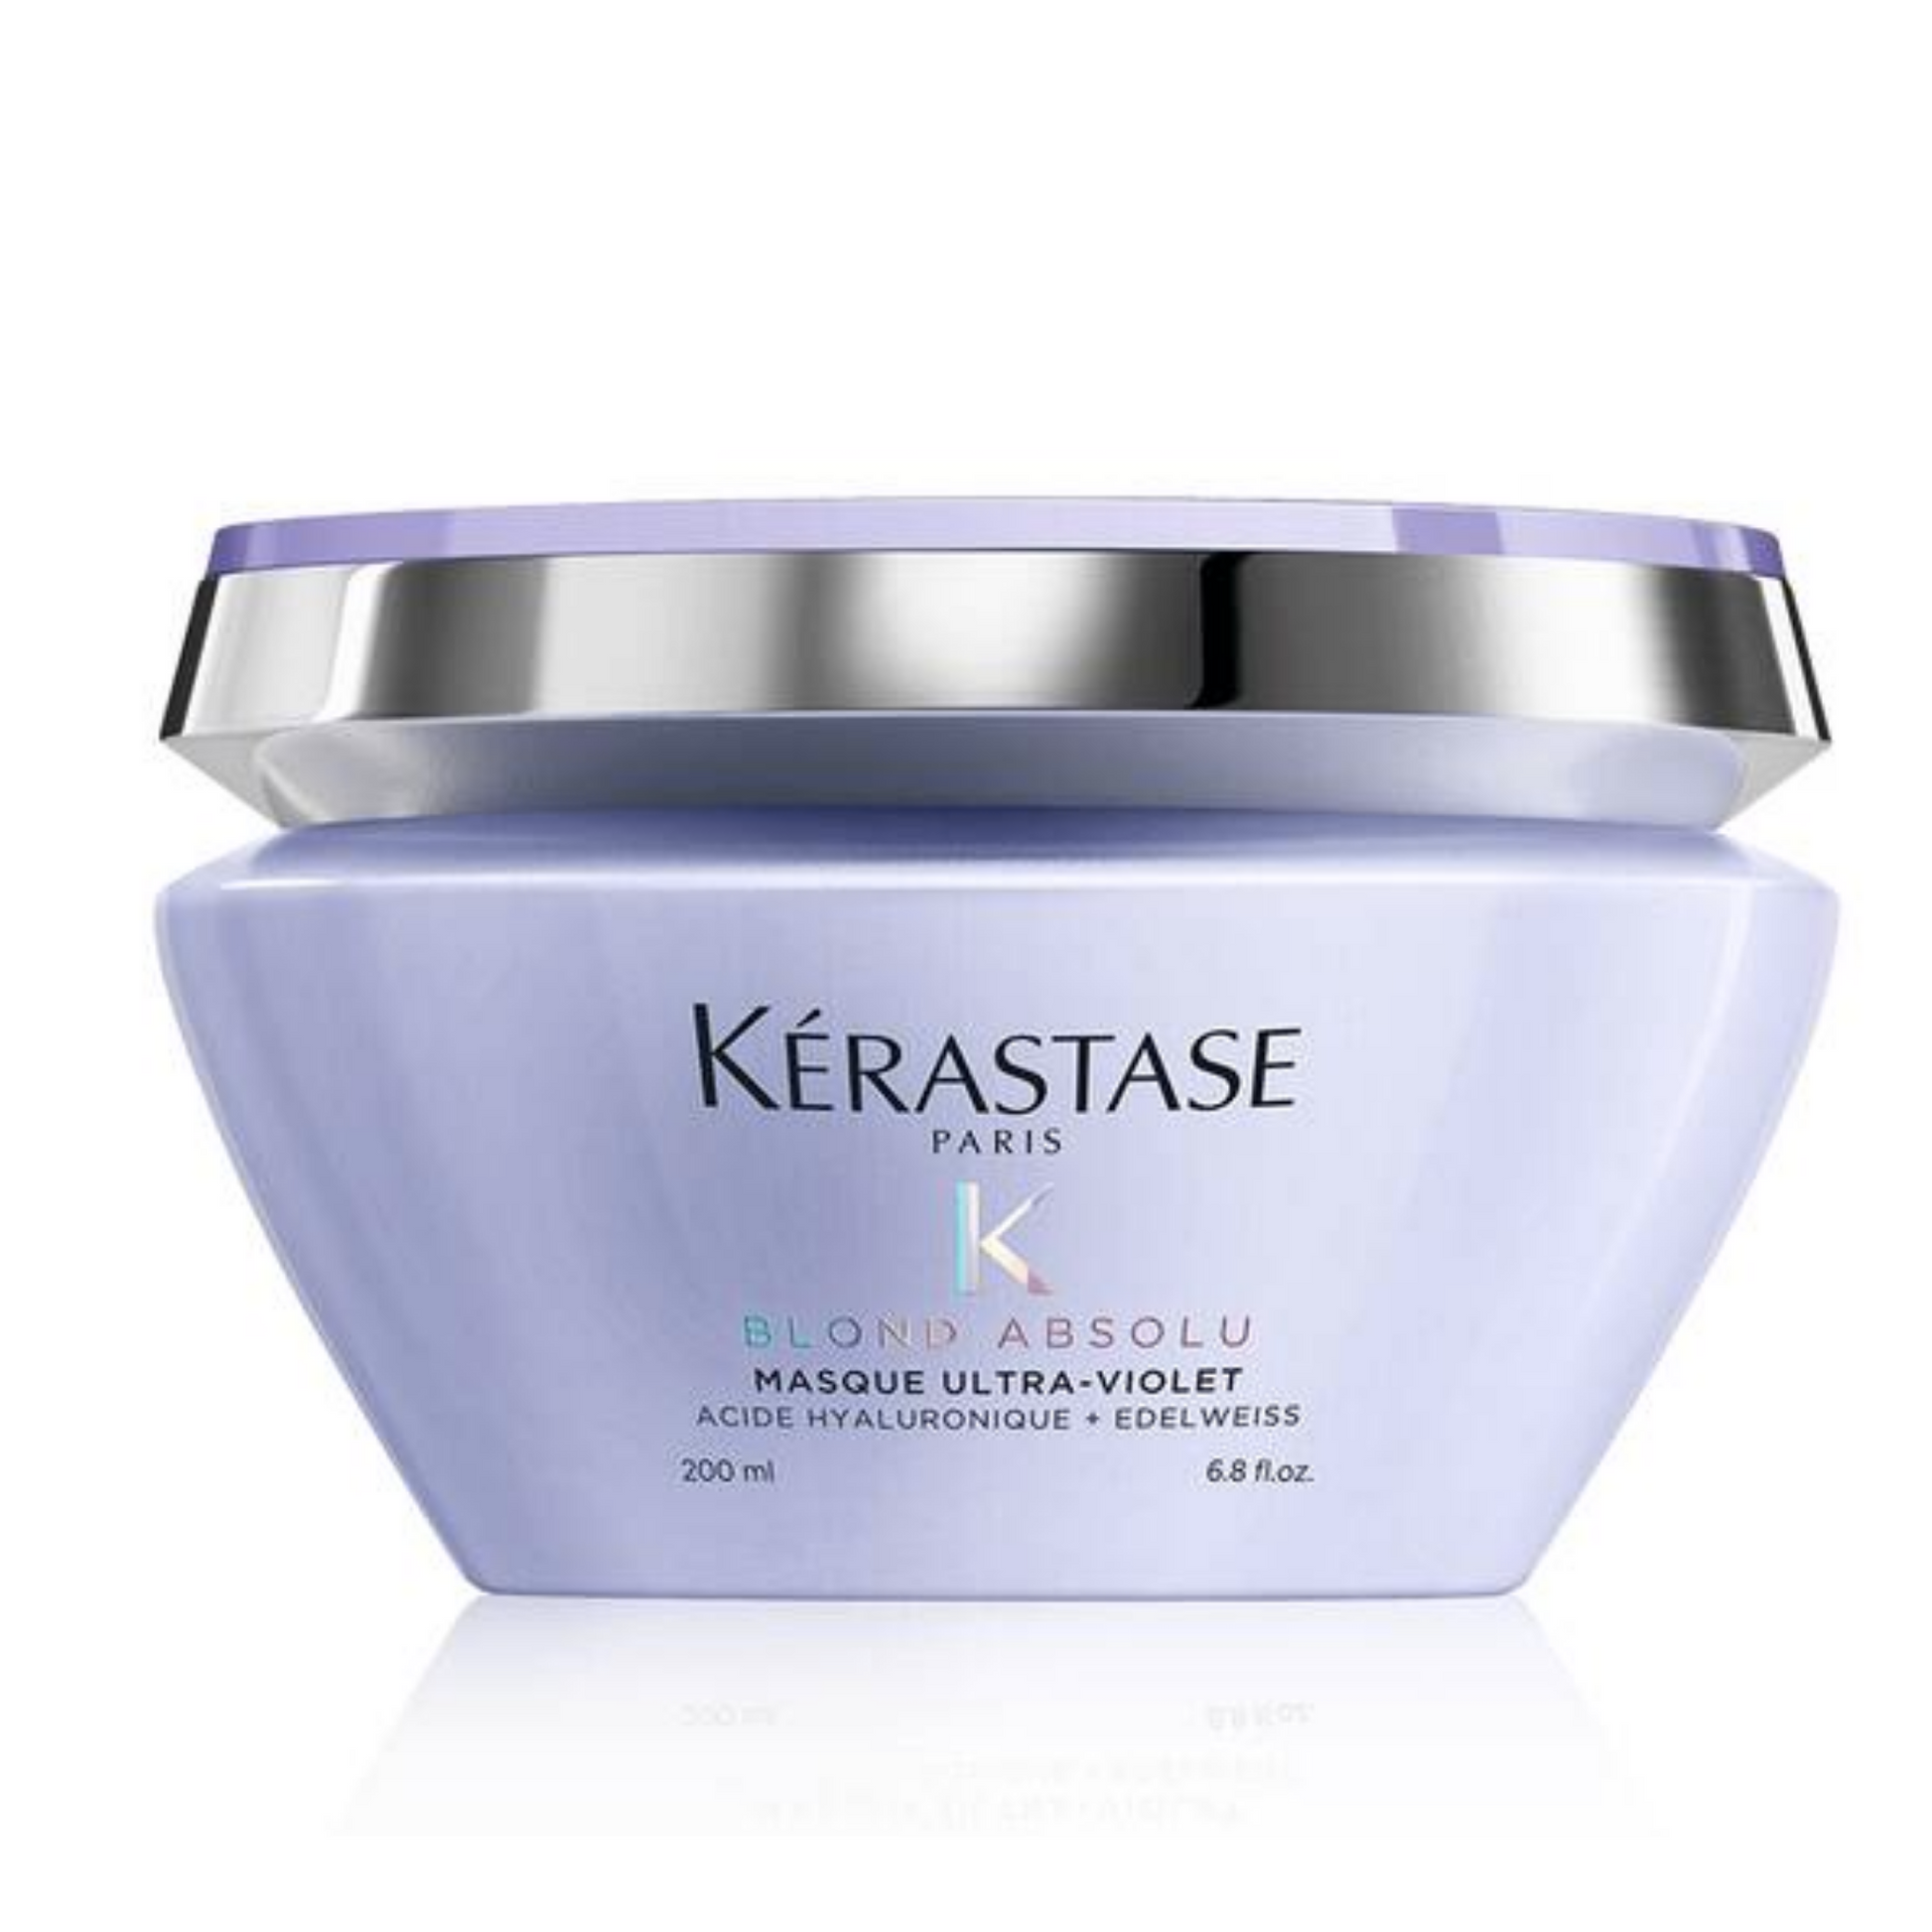 Masque Ultra-Violet Purple Hair Mask - Purple hair mask with Hyaluronic Acid neutralizes brassy hair.